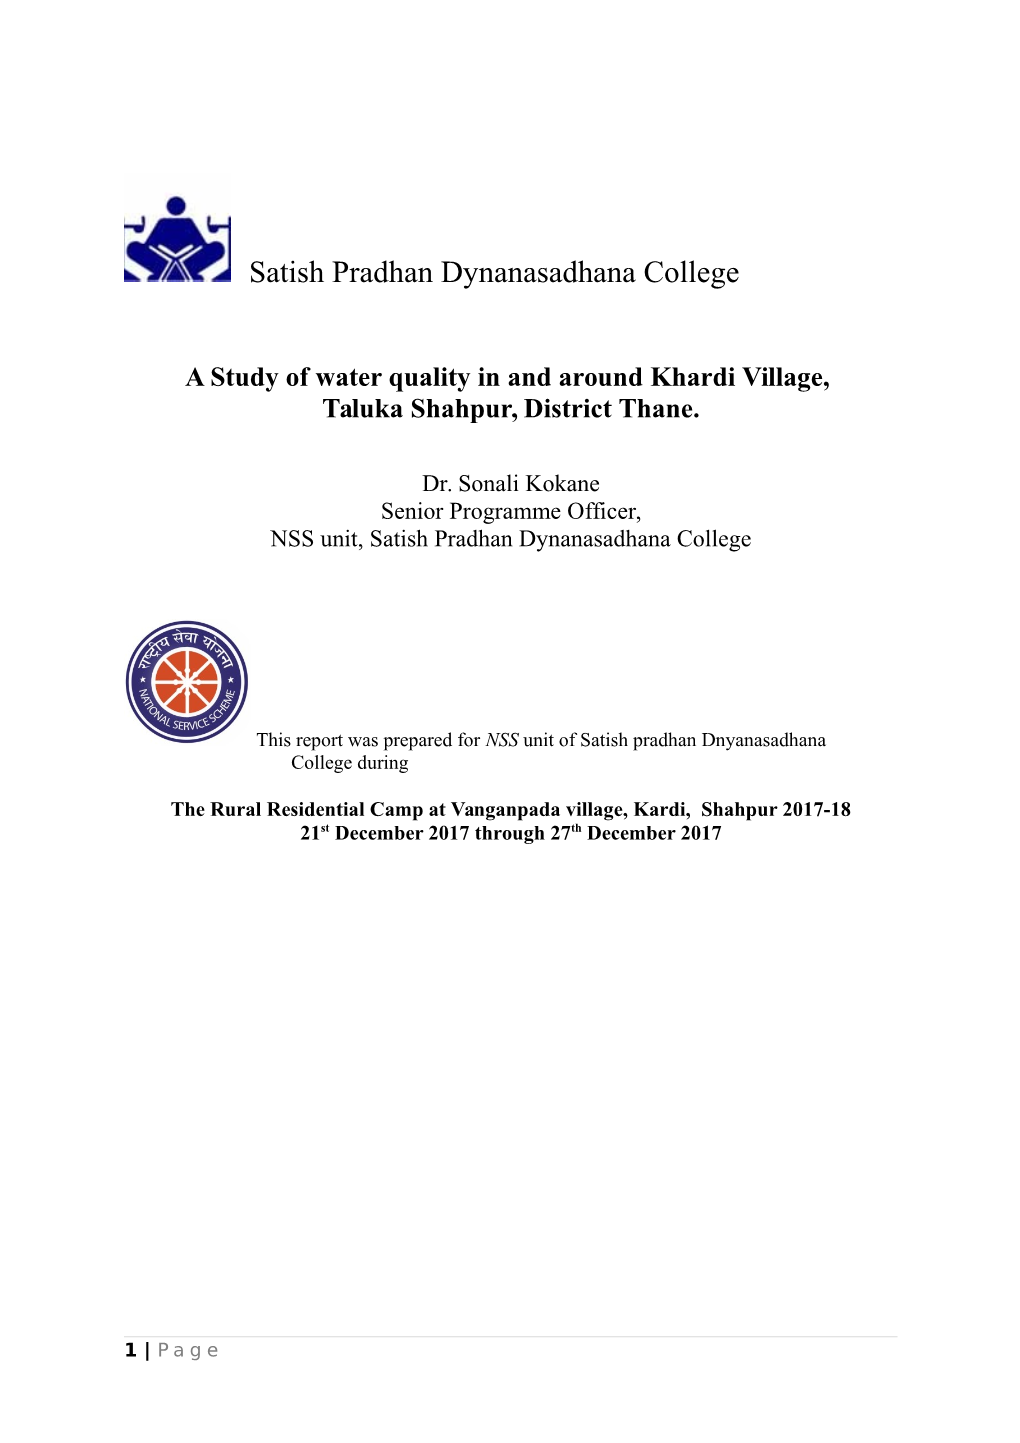 A Study of Water Quality in and Around Khardi Village, Taluka Shahpur, District Thane